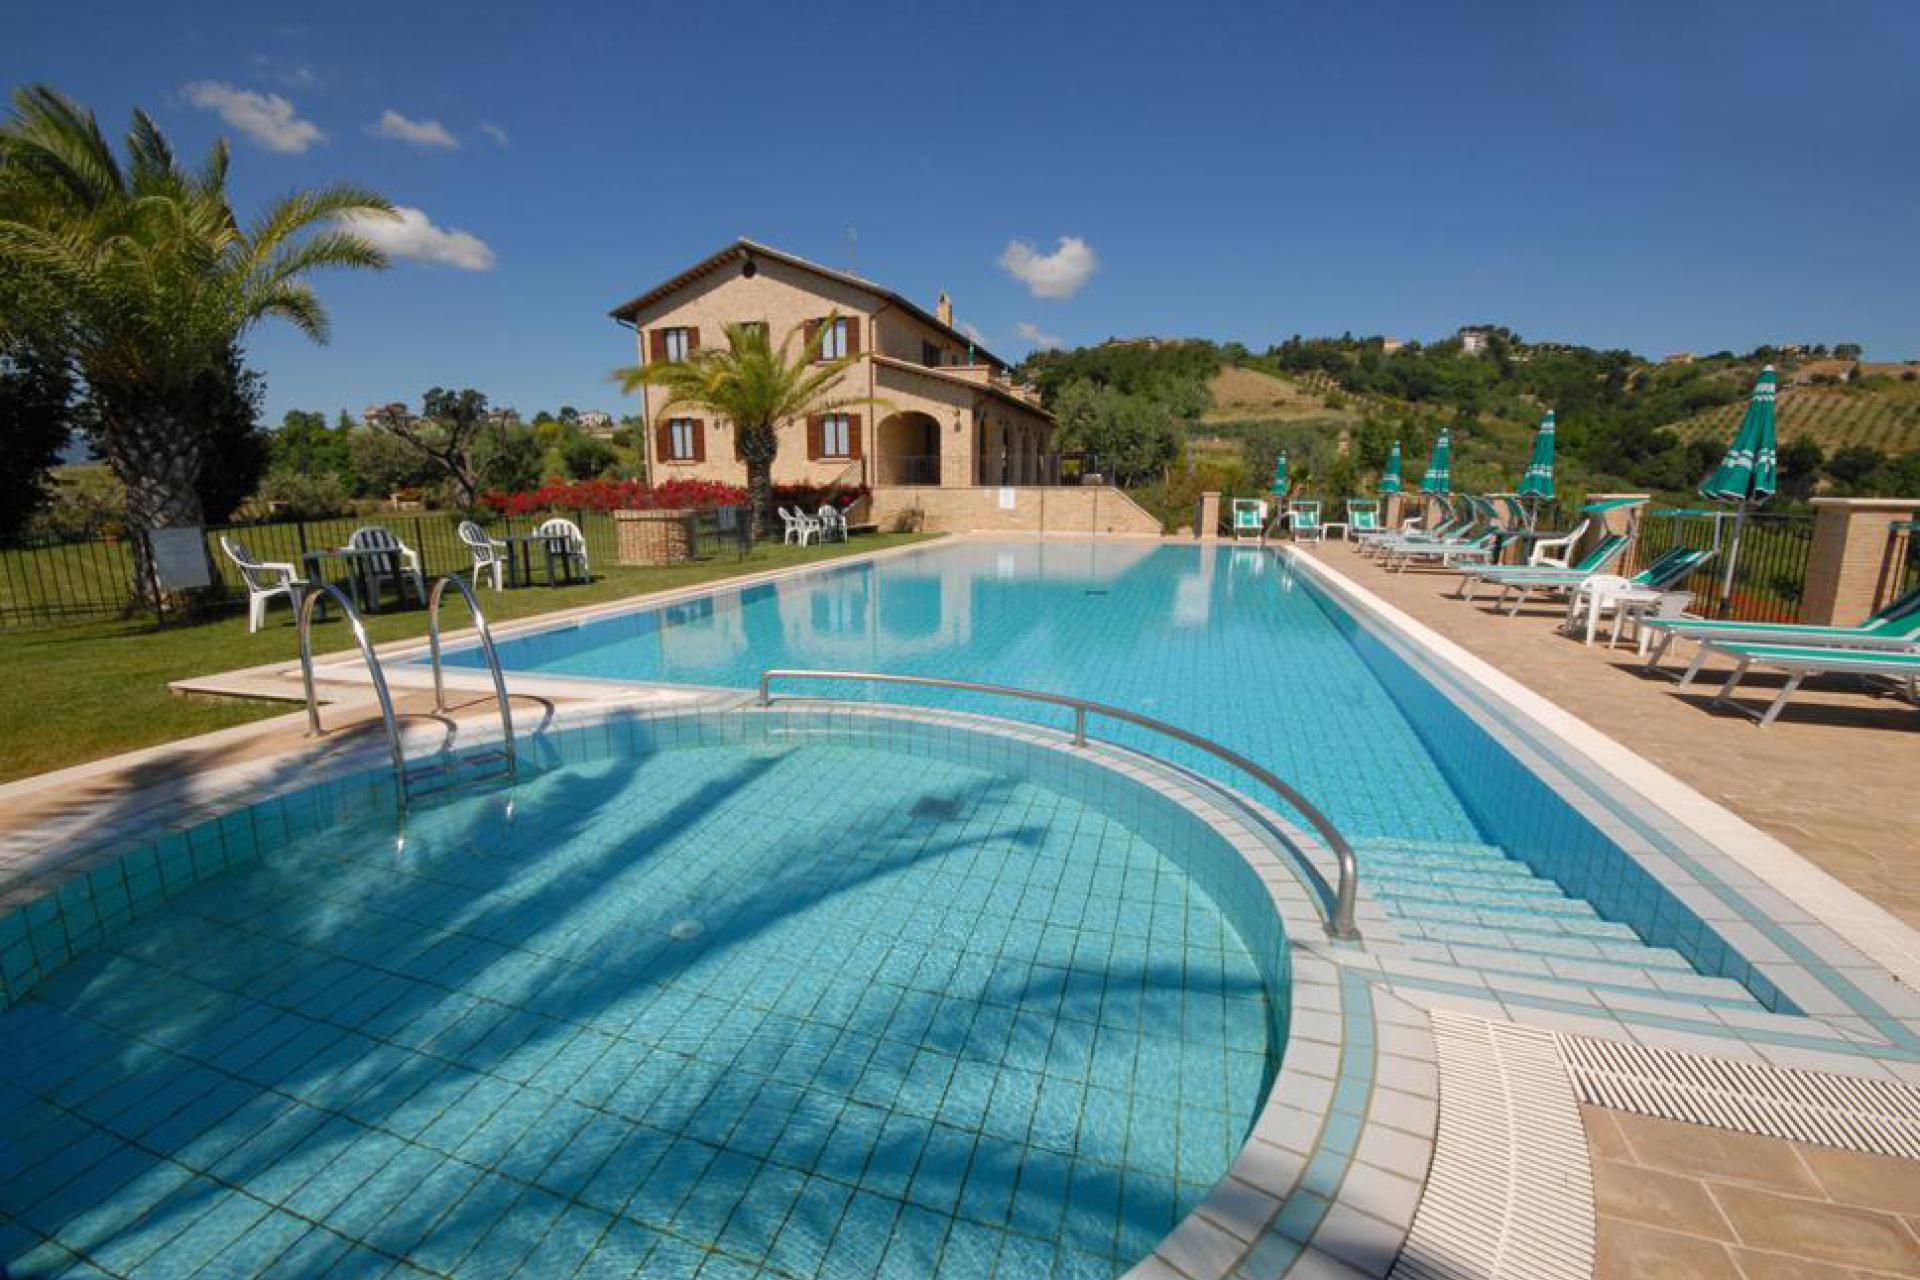 Agriturismo le Marche, welcoming and child friendly